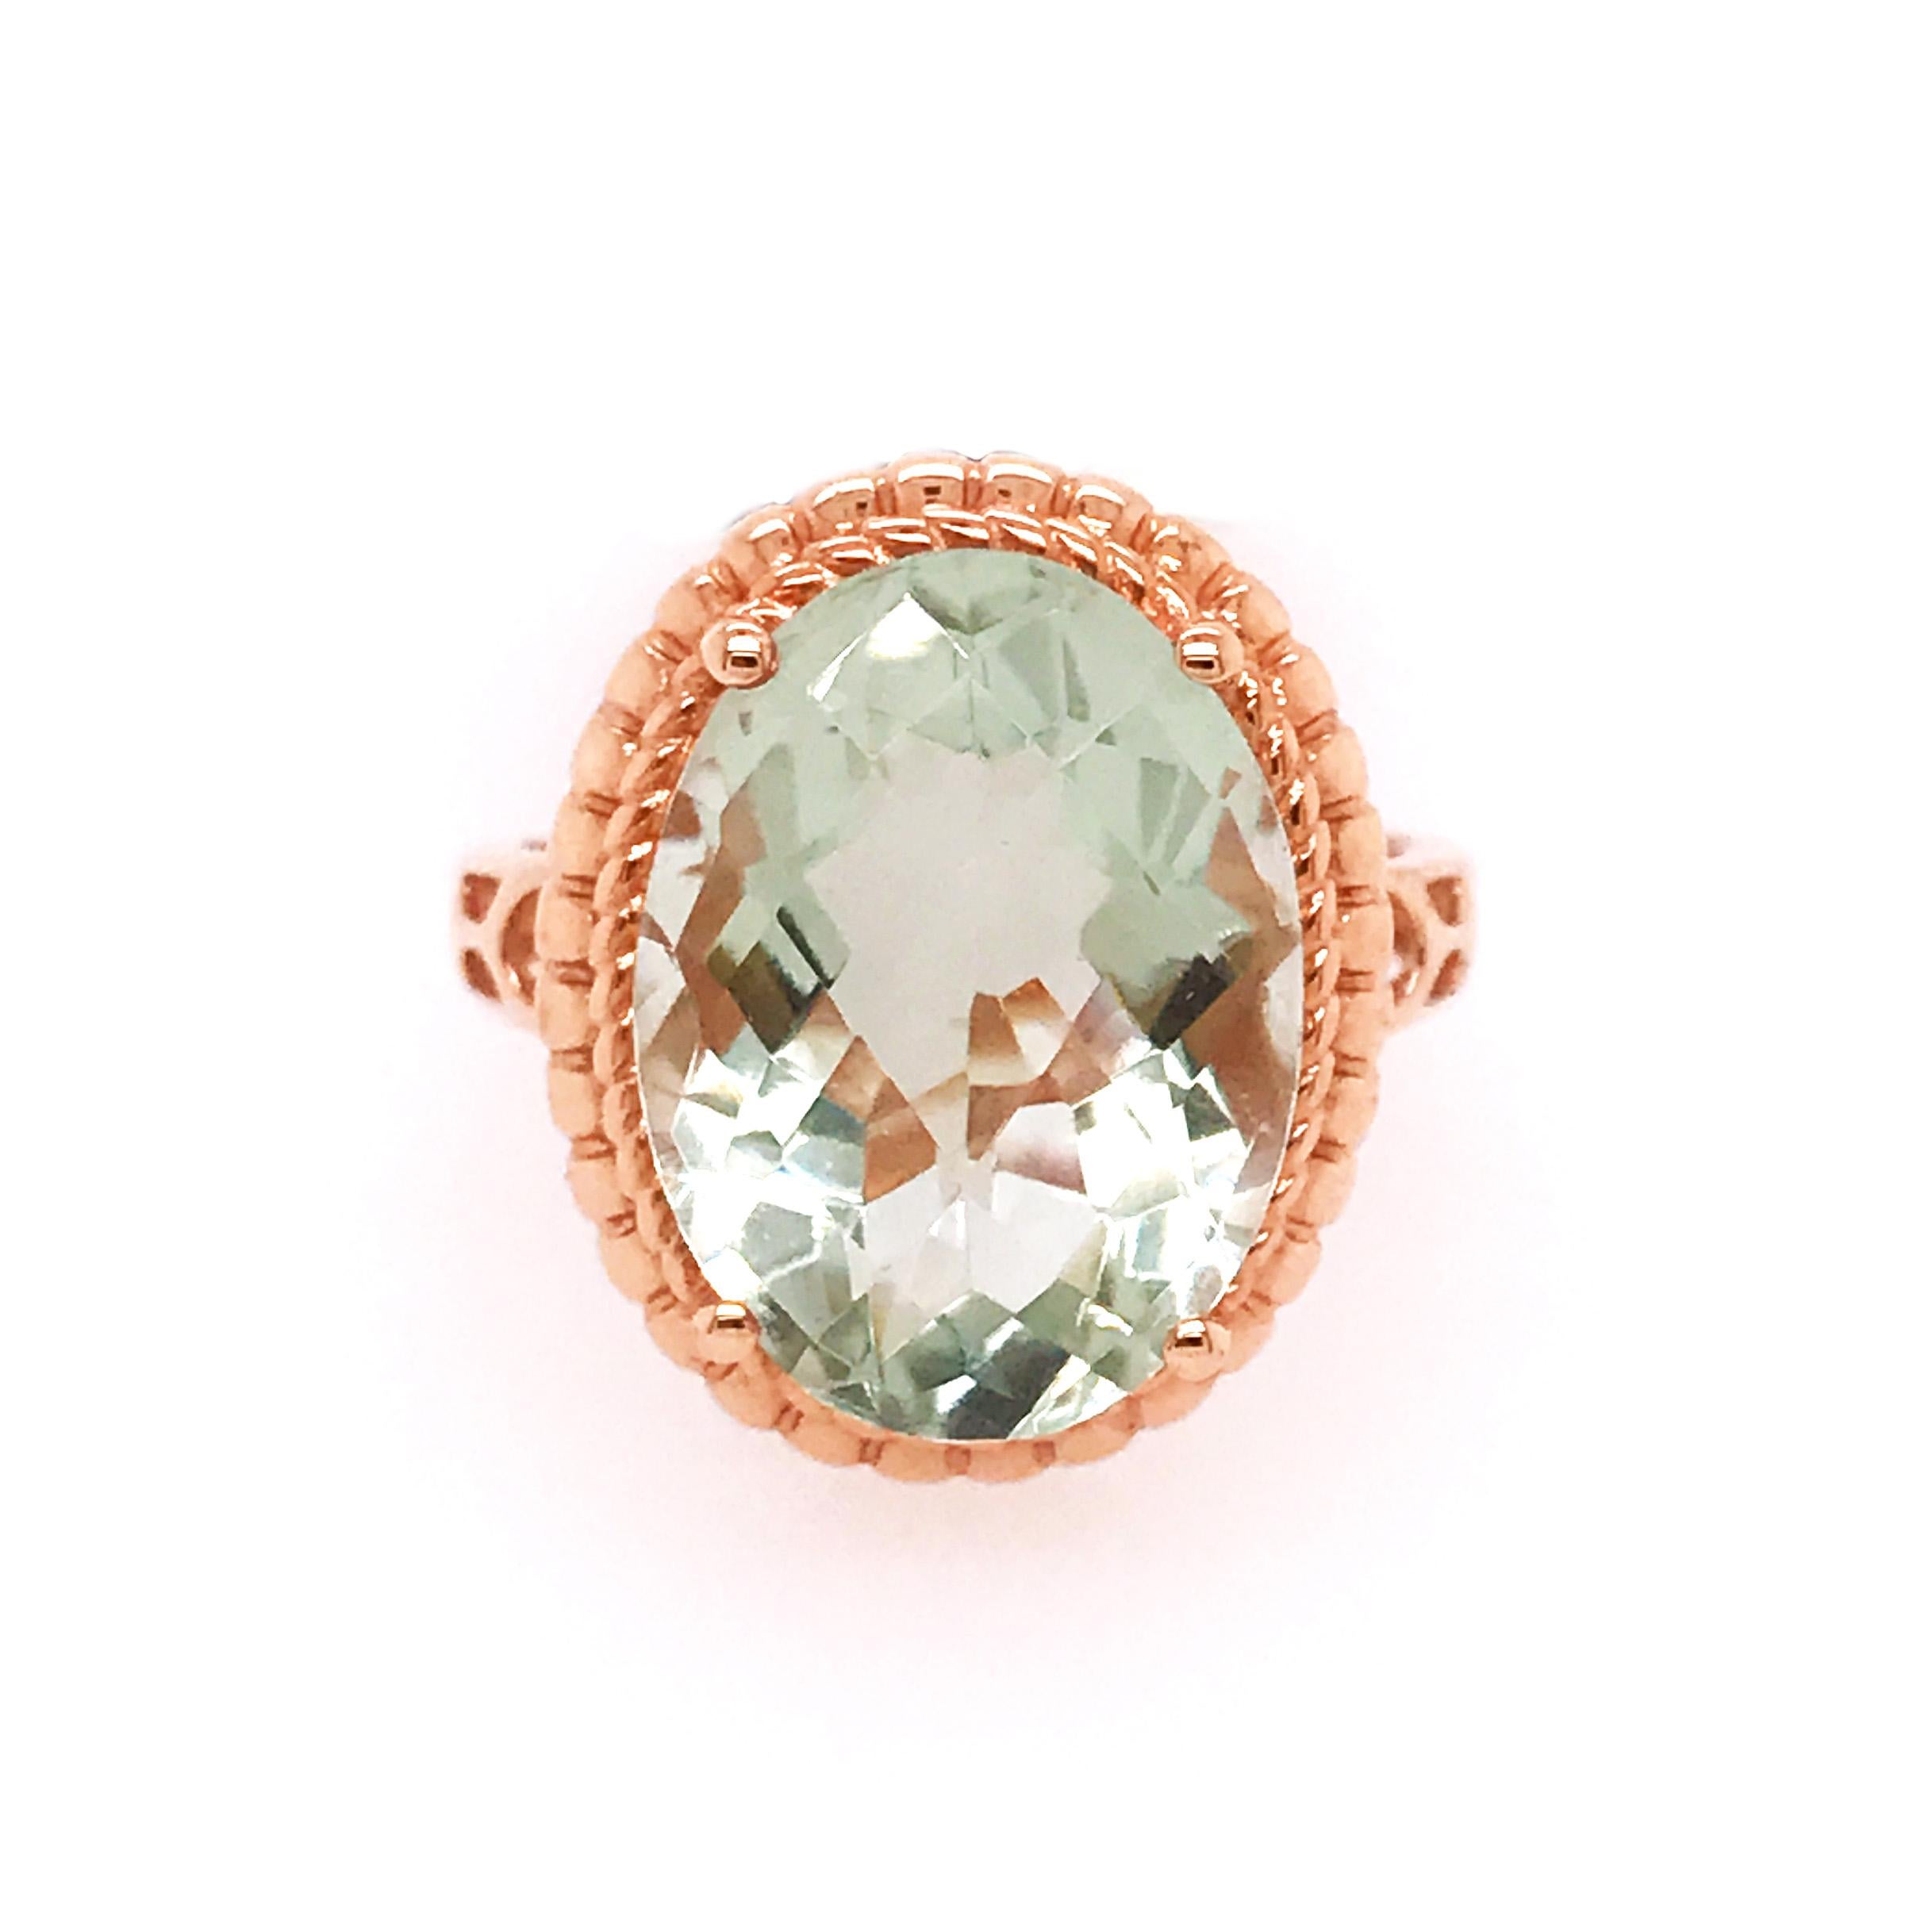 This genuine green amethyst ring is unique! The amethyst has a beautiful, almost sea-foam, pale green color. The oval gemstone has been cut perfectly to radiate the most brilliance possible. Set in a rose gold setting make just for this stone. The